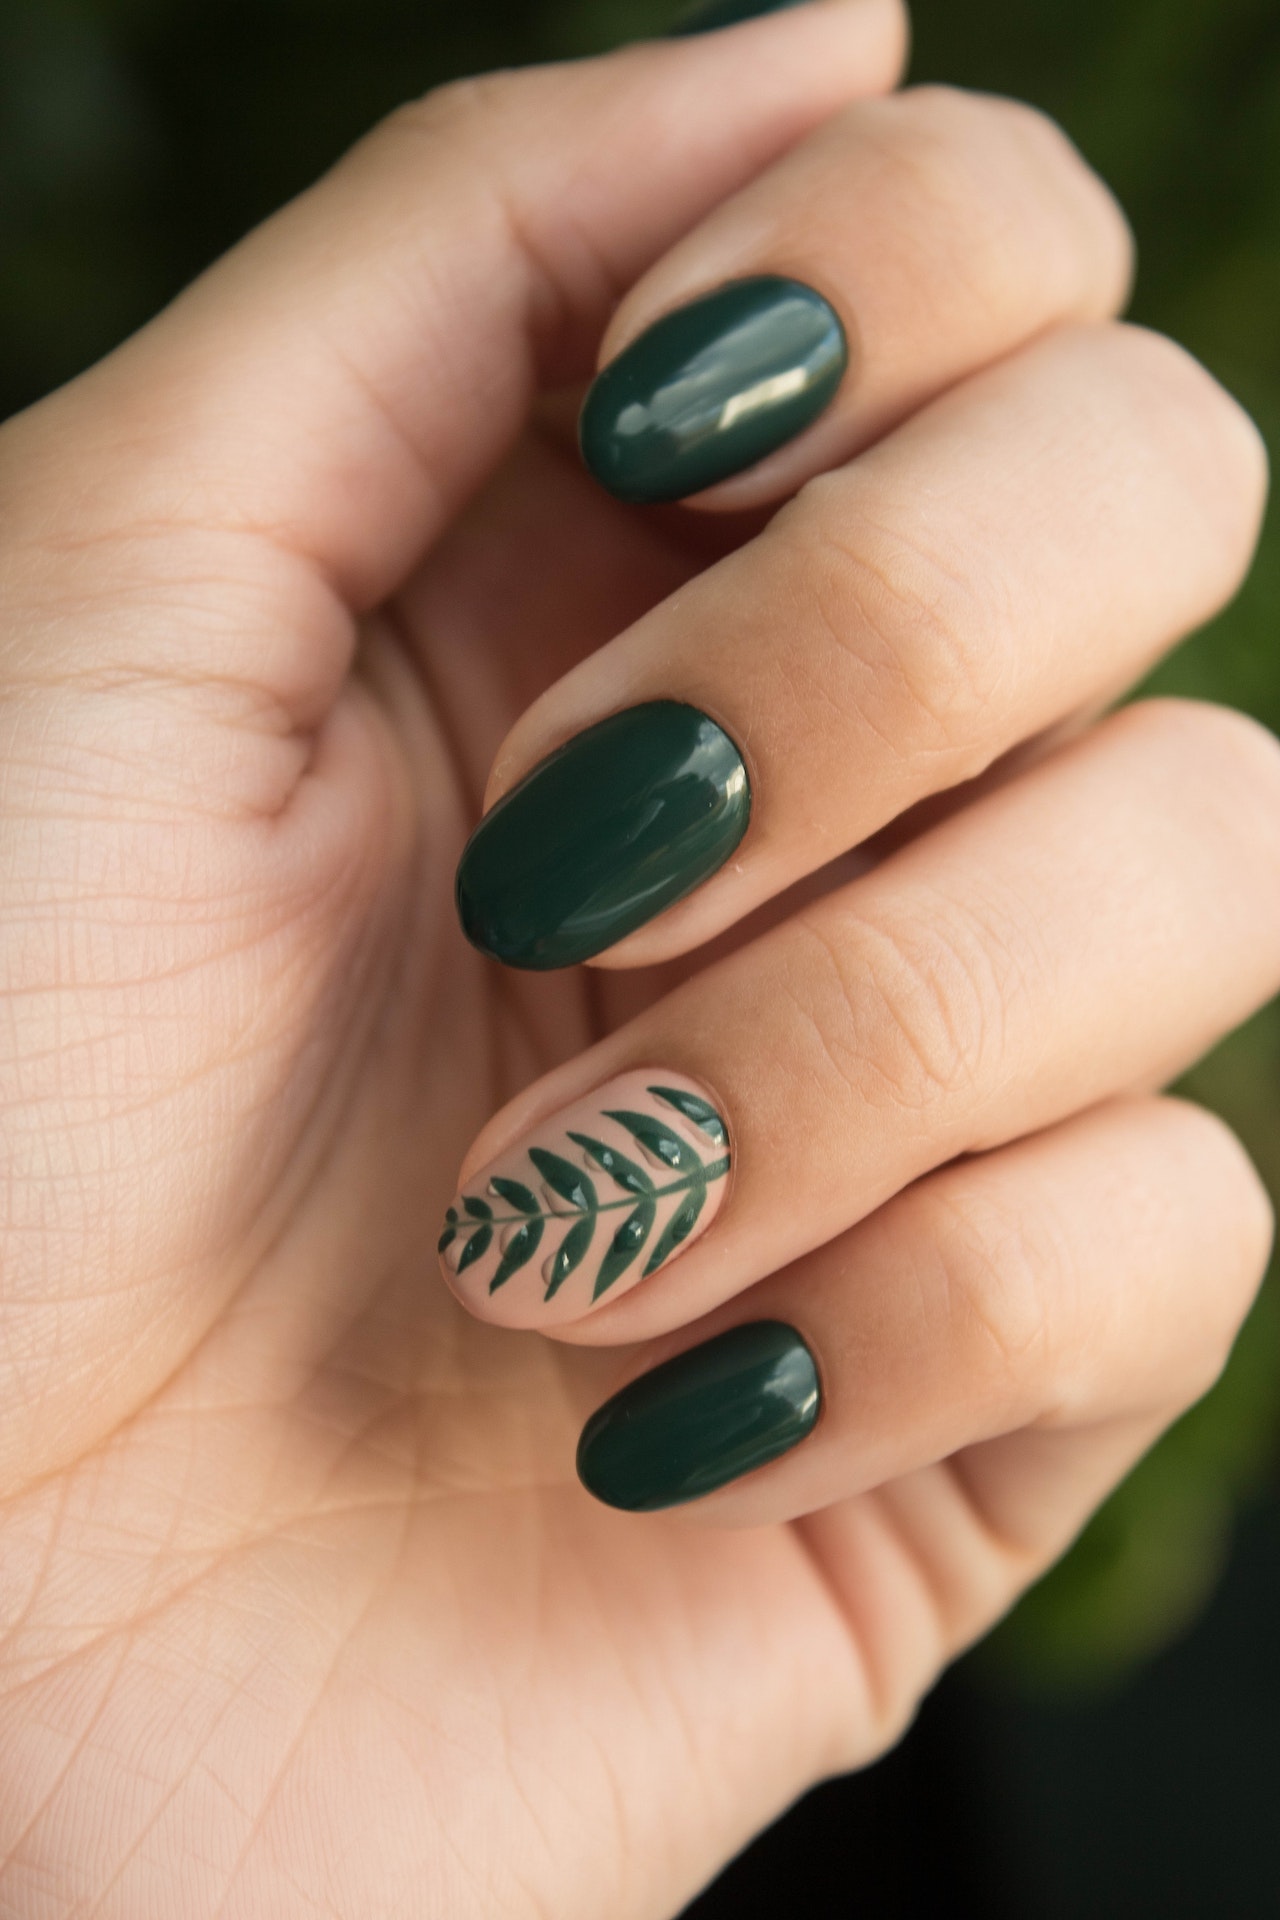 Hand with the Green Beauty Nails